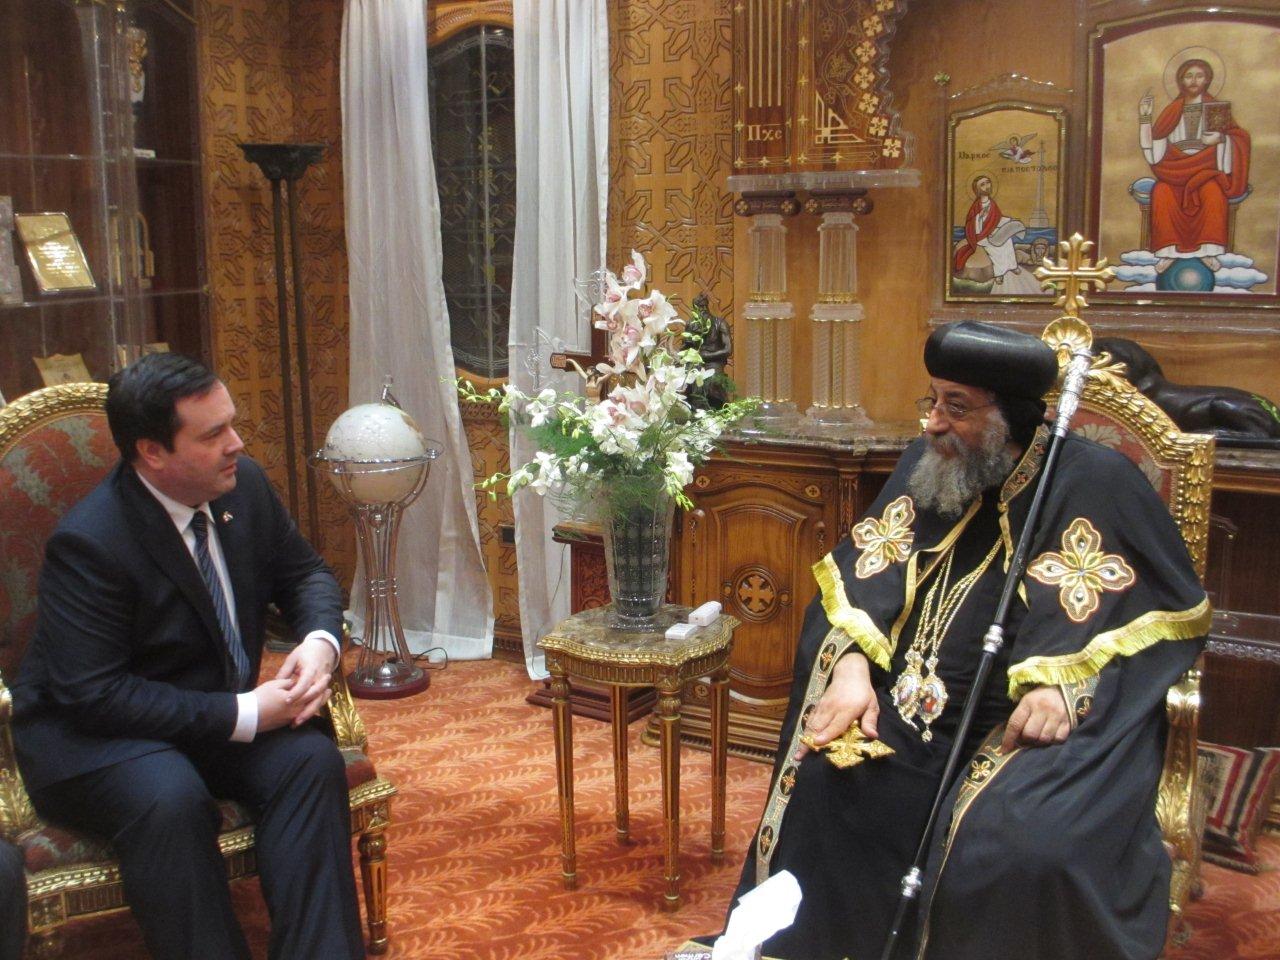  Minister Kenney issues statement regarding the Coptic Patriarchal Enthronement of Pope Tawadros II